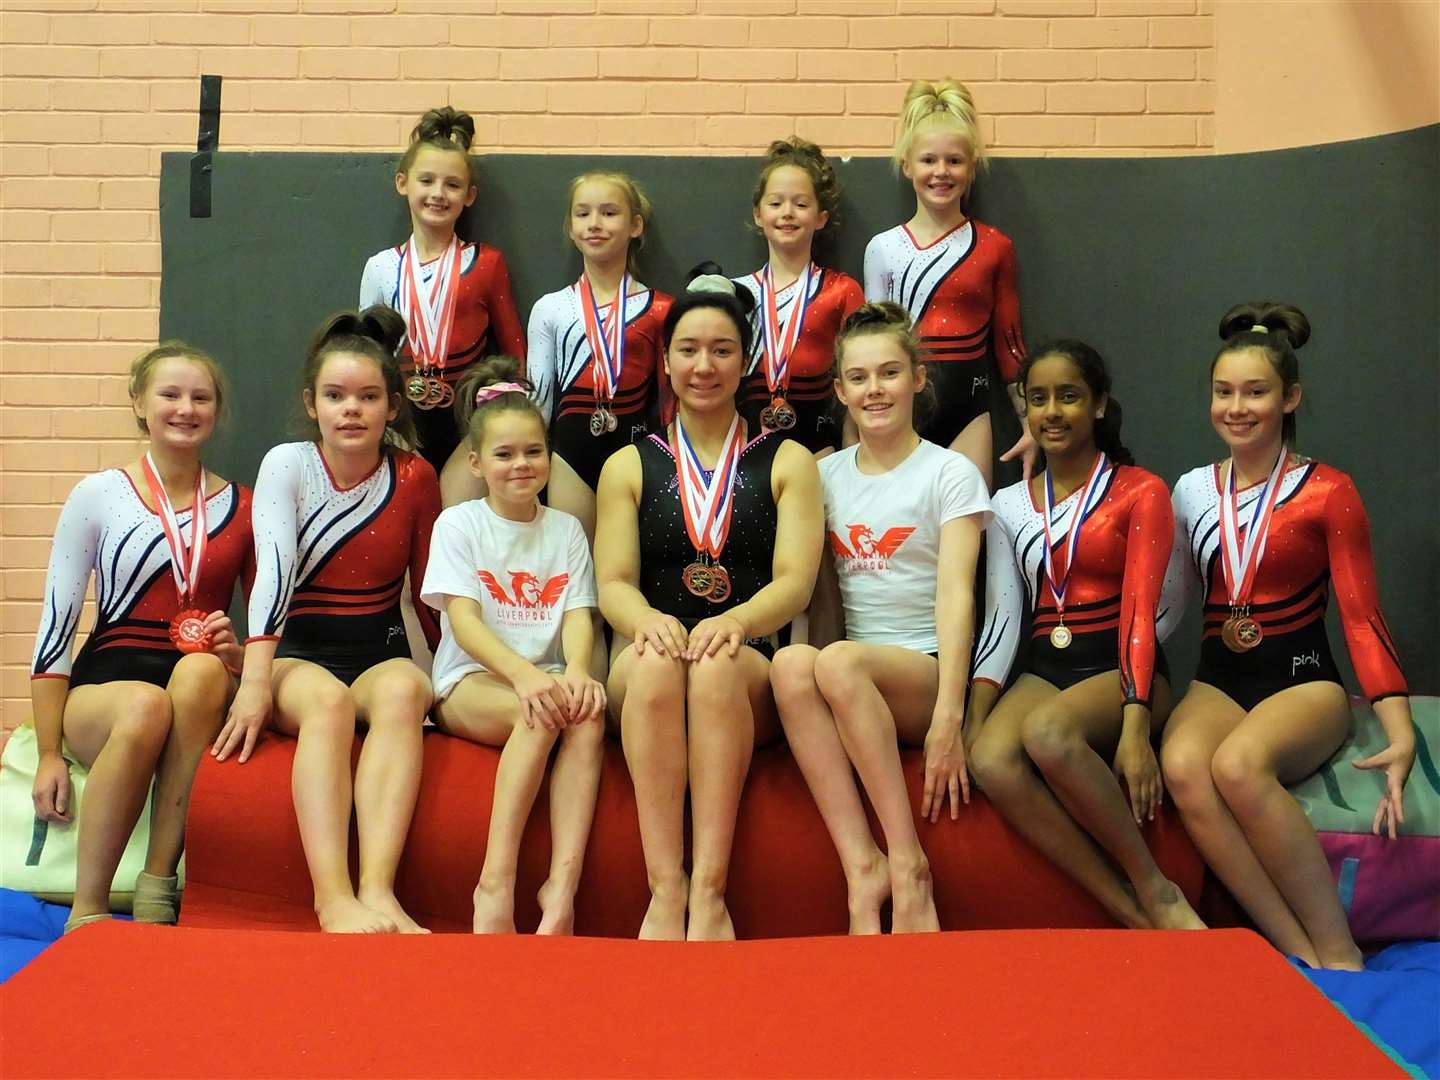 Garioch girls travel across the country to compete including a recent event in Liverpool.